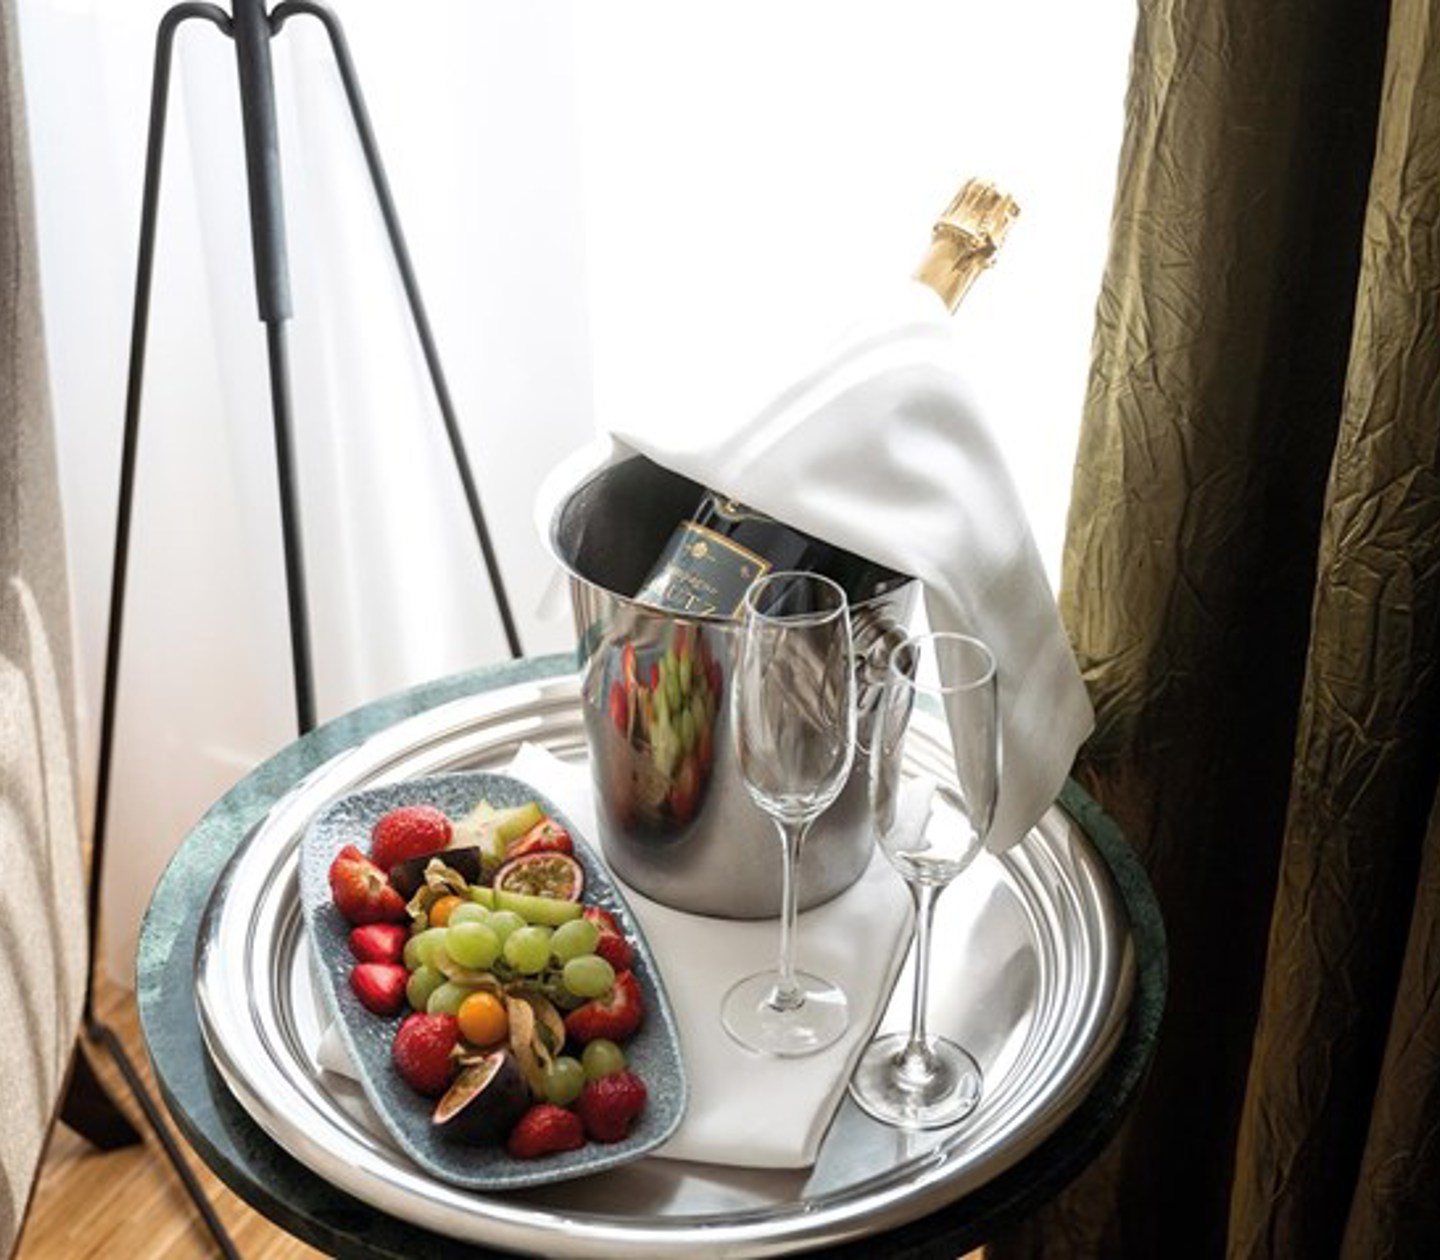 A bottle of Champagne in an ice bucket, two champagne glasses and a fruit platter on a table